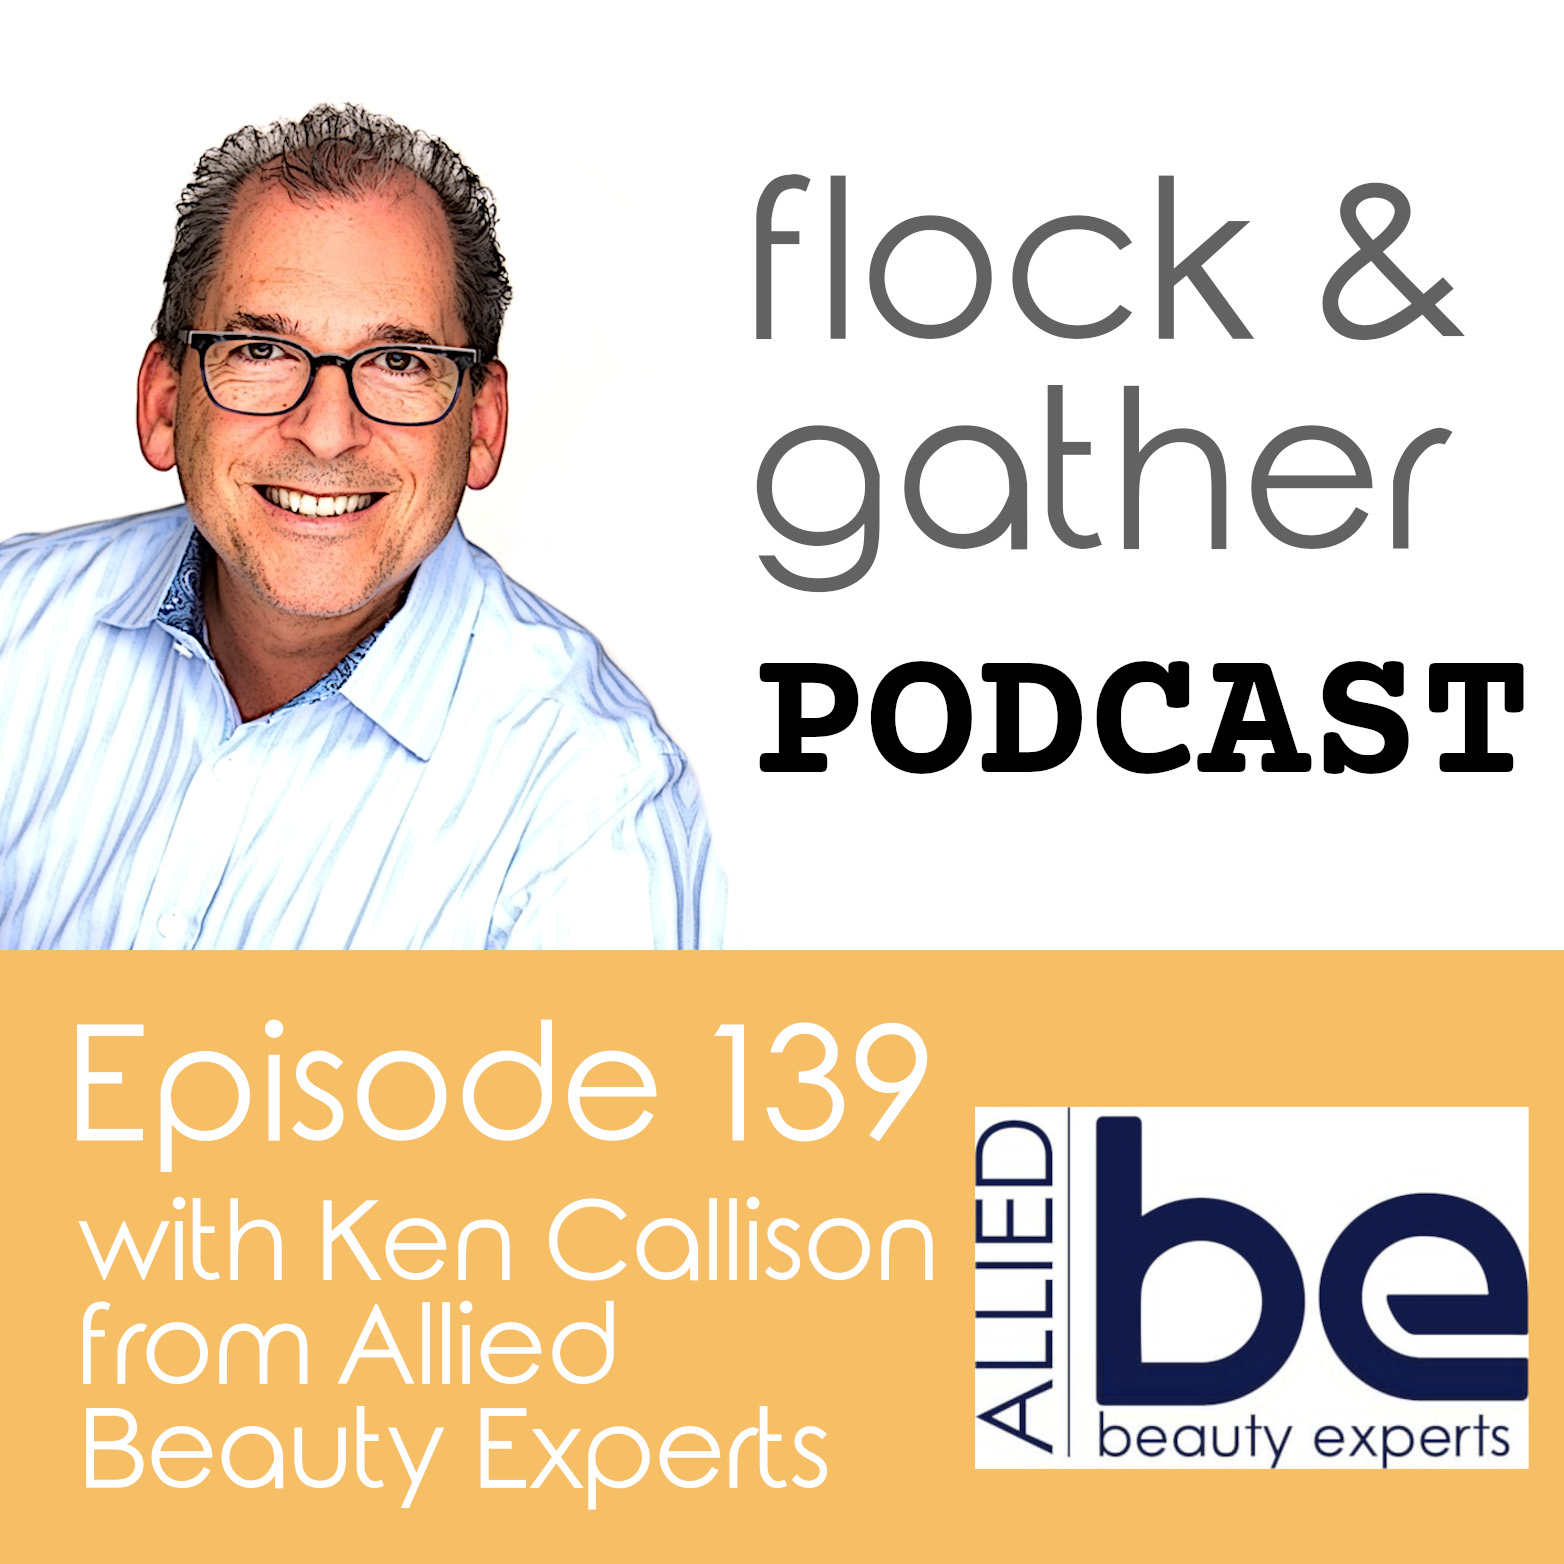 Flock and Gather Podcast.  Episode 139 with Ken Callison from Allied Beauty Experts